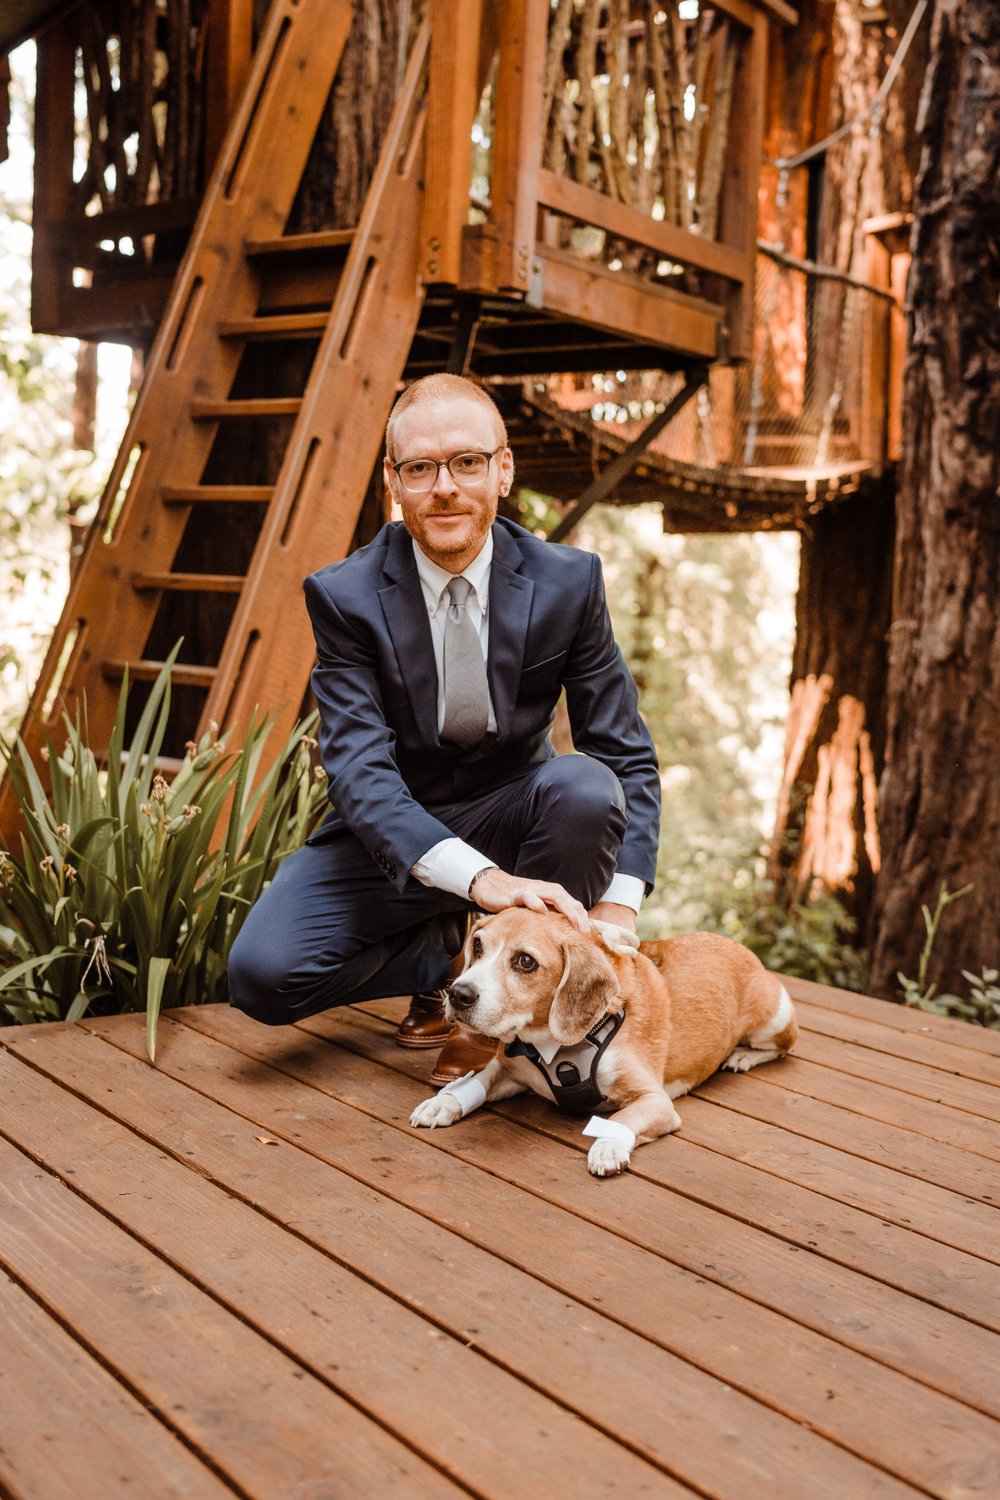 Wedding-in-the-Woods-Red-Haired-Groom-with-Senior-Rescue-Dog-Beagle (2).jpg